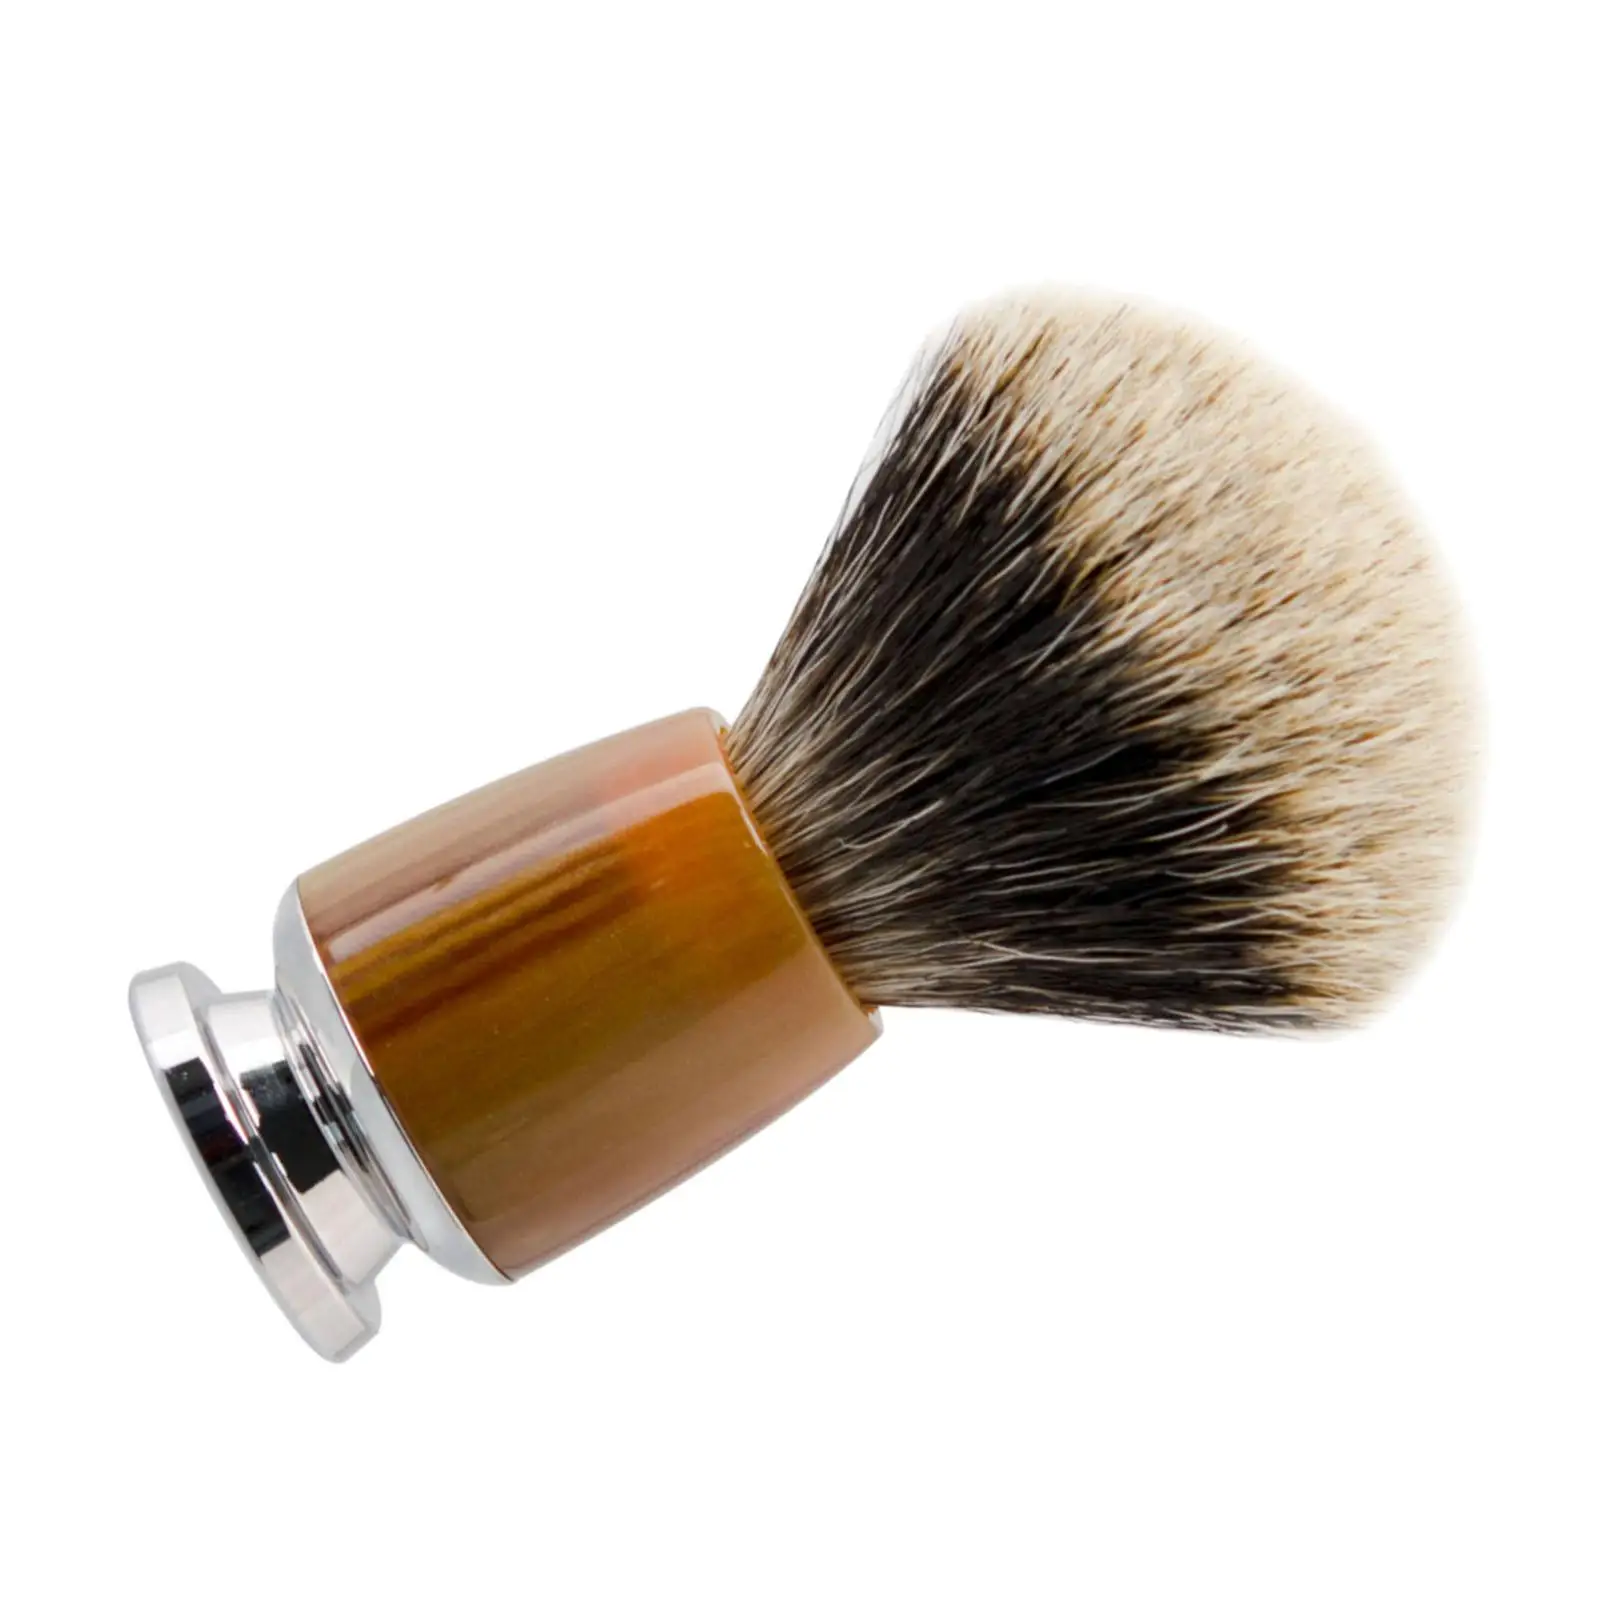 Shaving Brush for Men Shave Brush Classic Wet Shave Handmade Rich and Fast Lather Shaving Cream Beard Cleaning for Dad Boyfriend